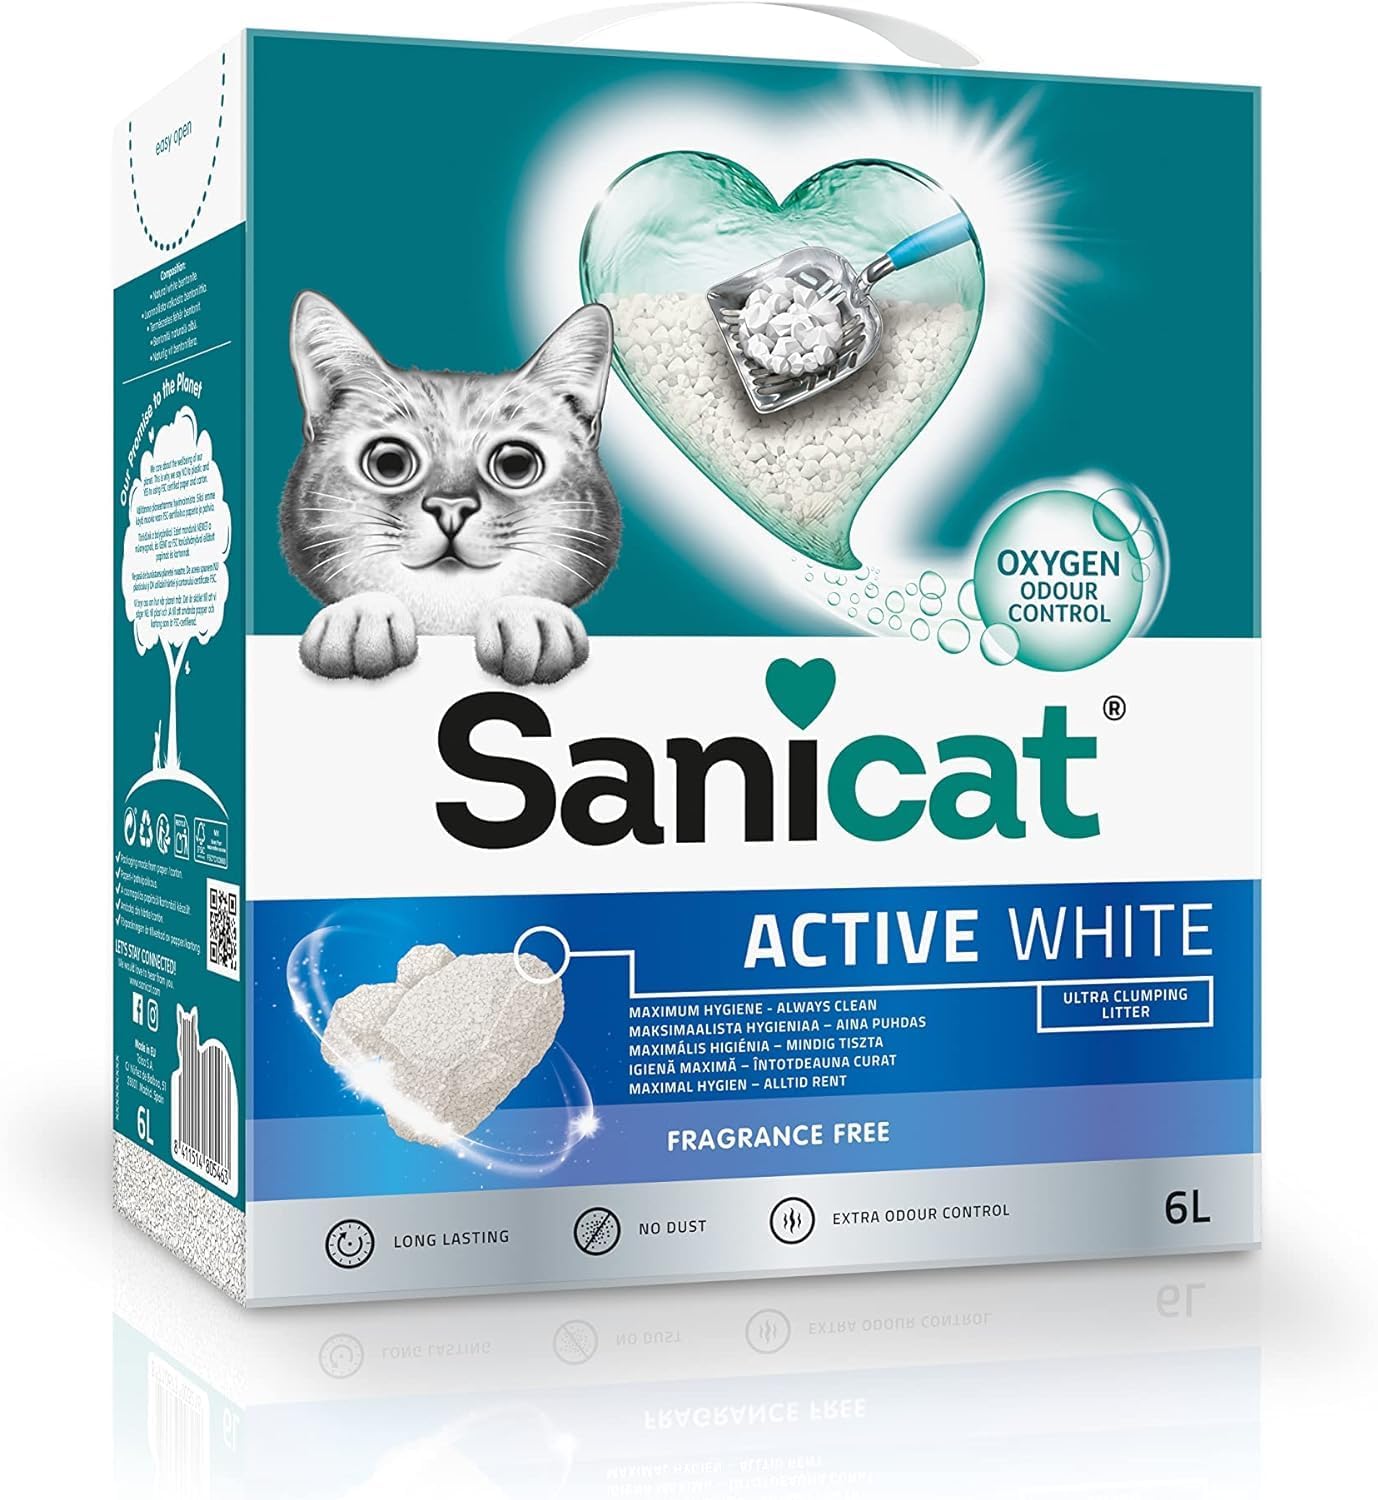 Sanicat - Active White Clumping Fragance-Free Cat Litter | Made of natural minerals with guaranteed odour control | Absorbs moisture and makes cleaning easier | 6 L capacity?PSANACWUV06L